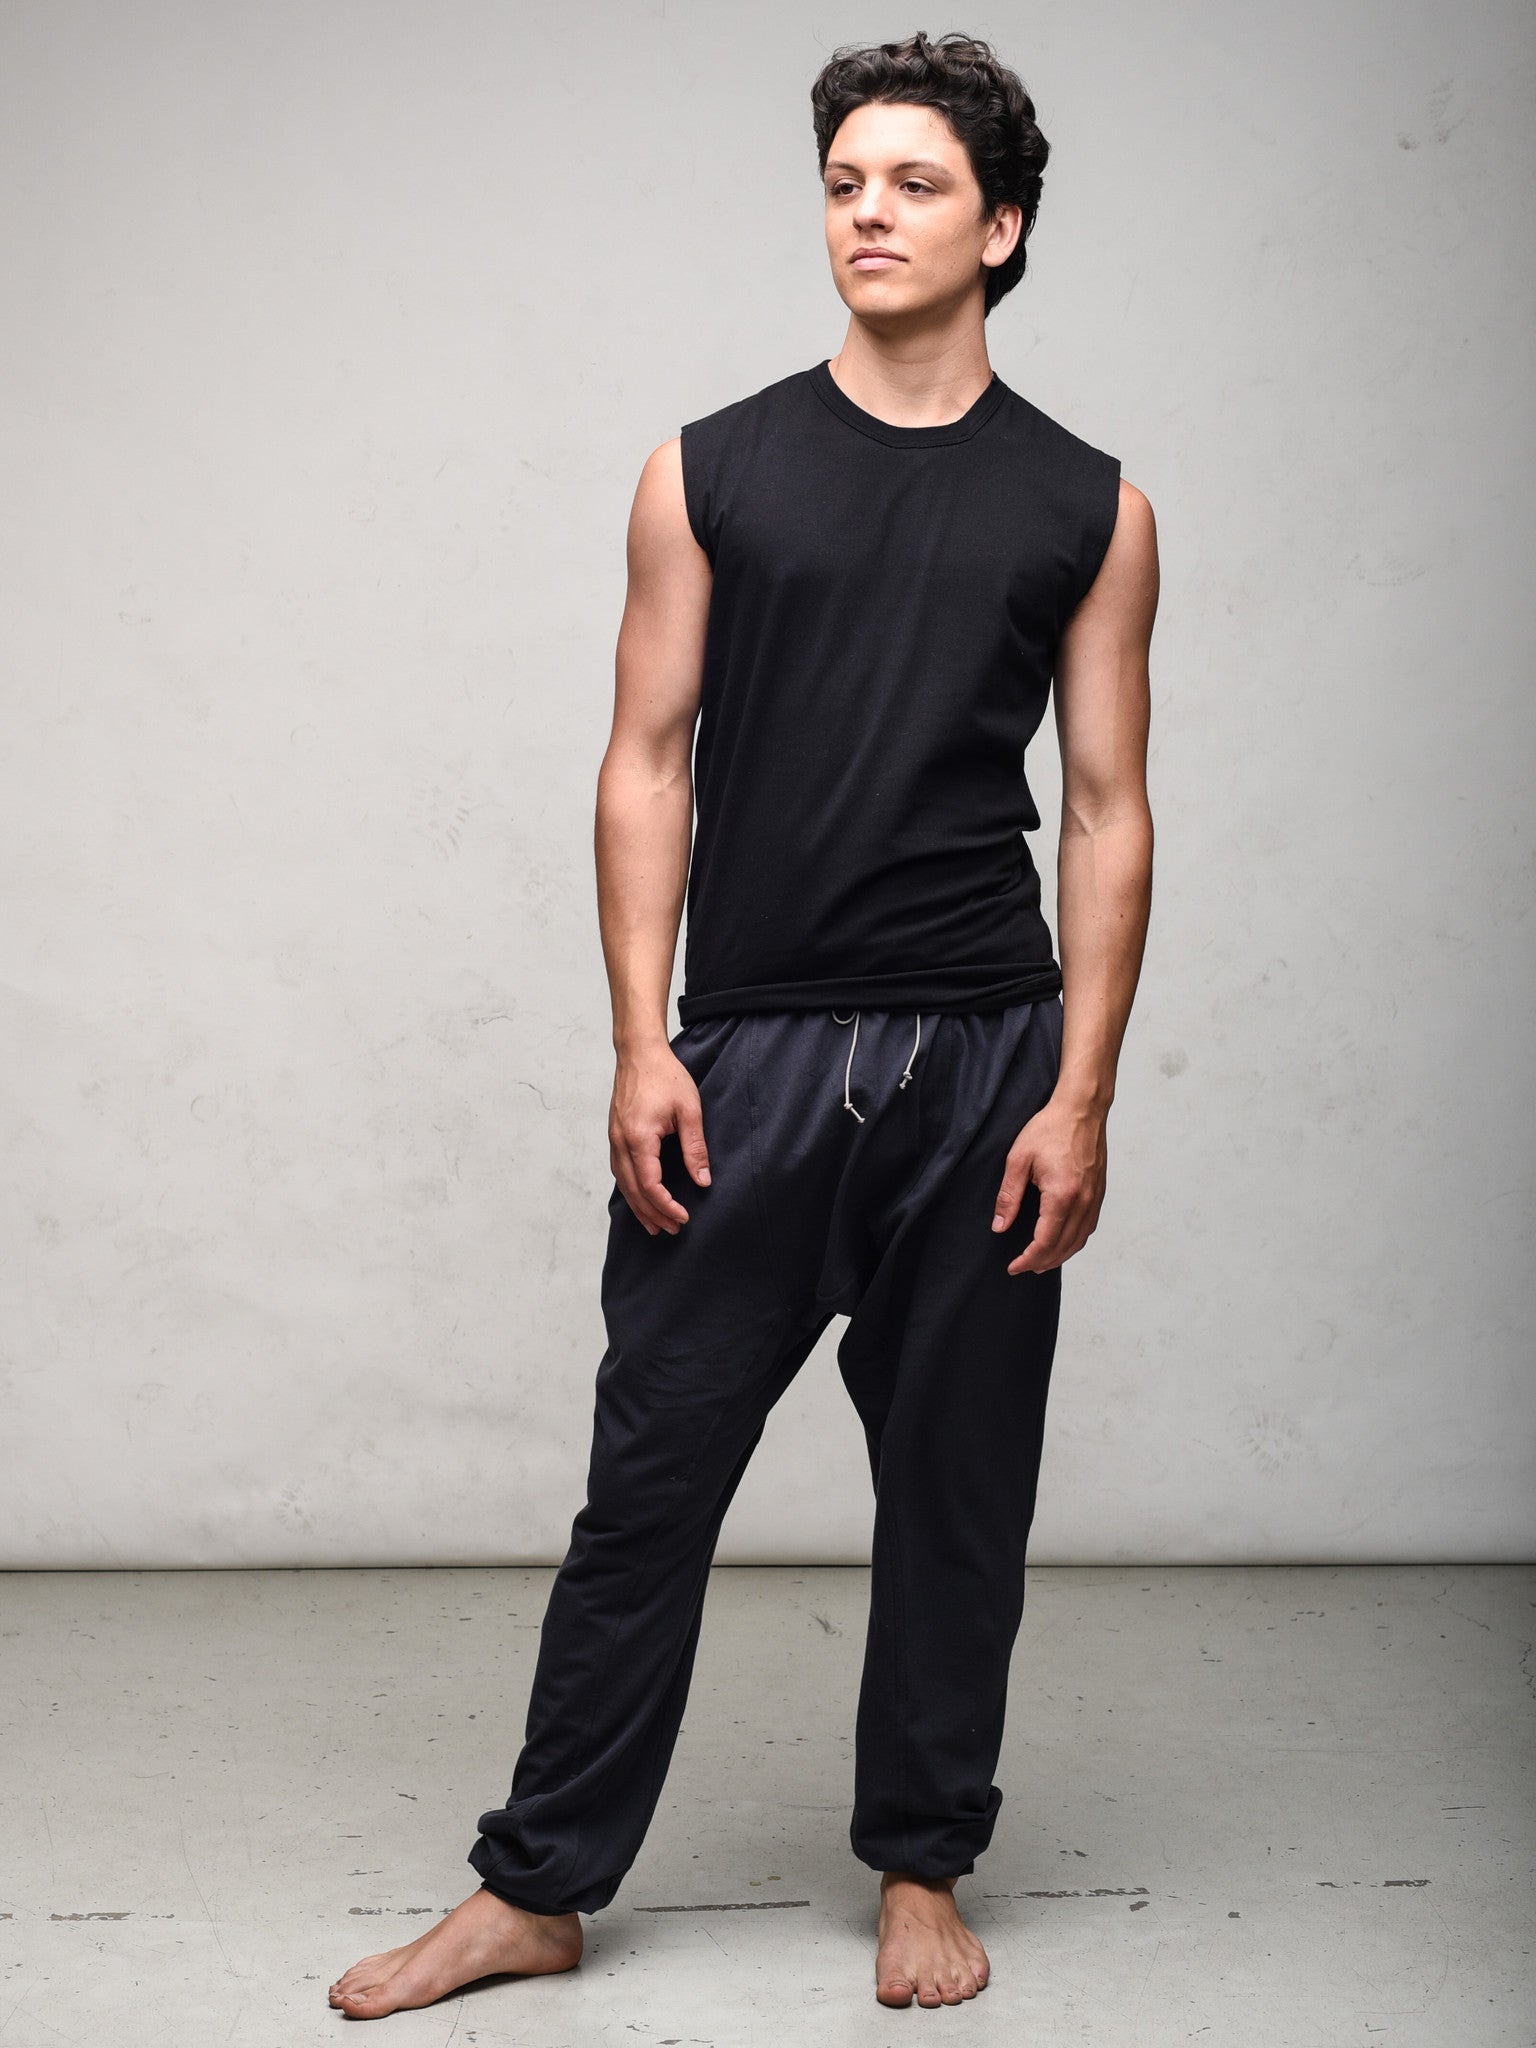 Zen Nomad mens sleeveless t shirt organic cotton and bamboo made in canada